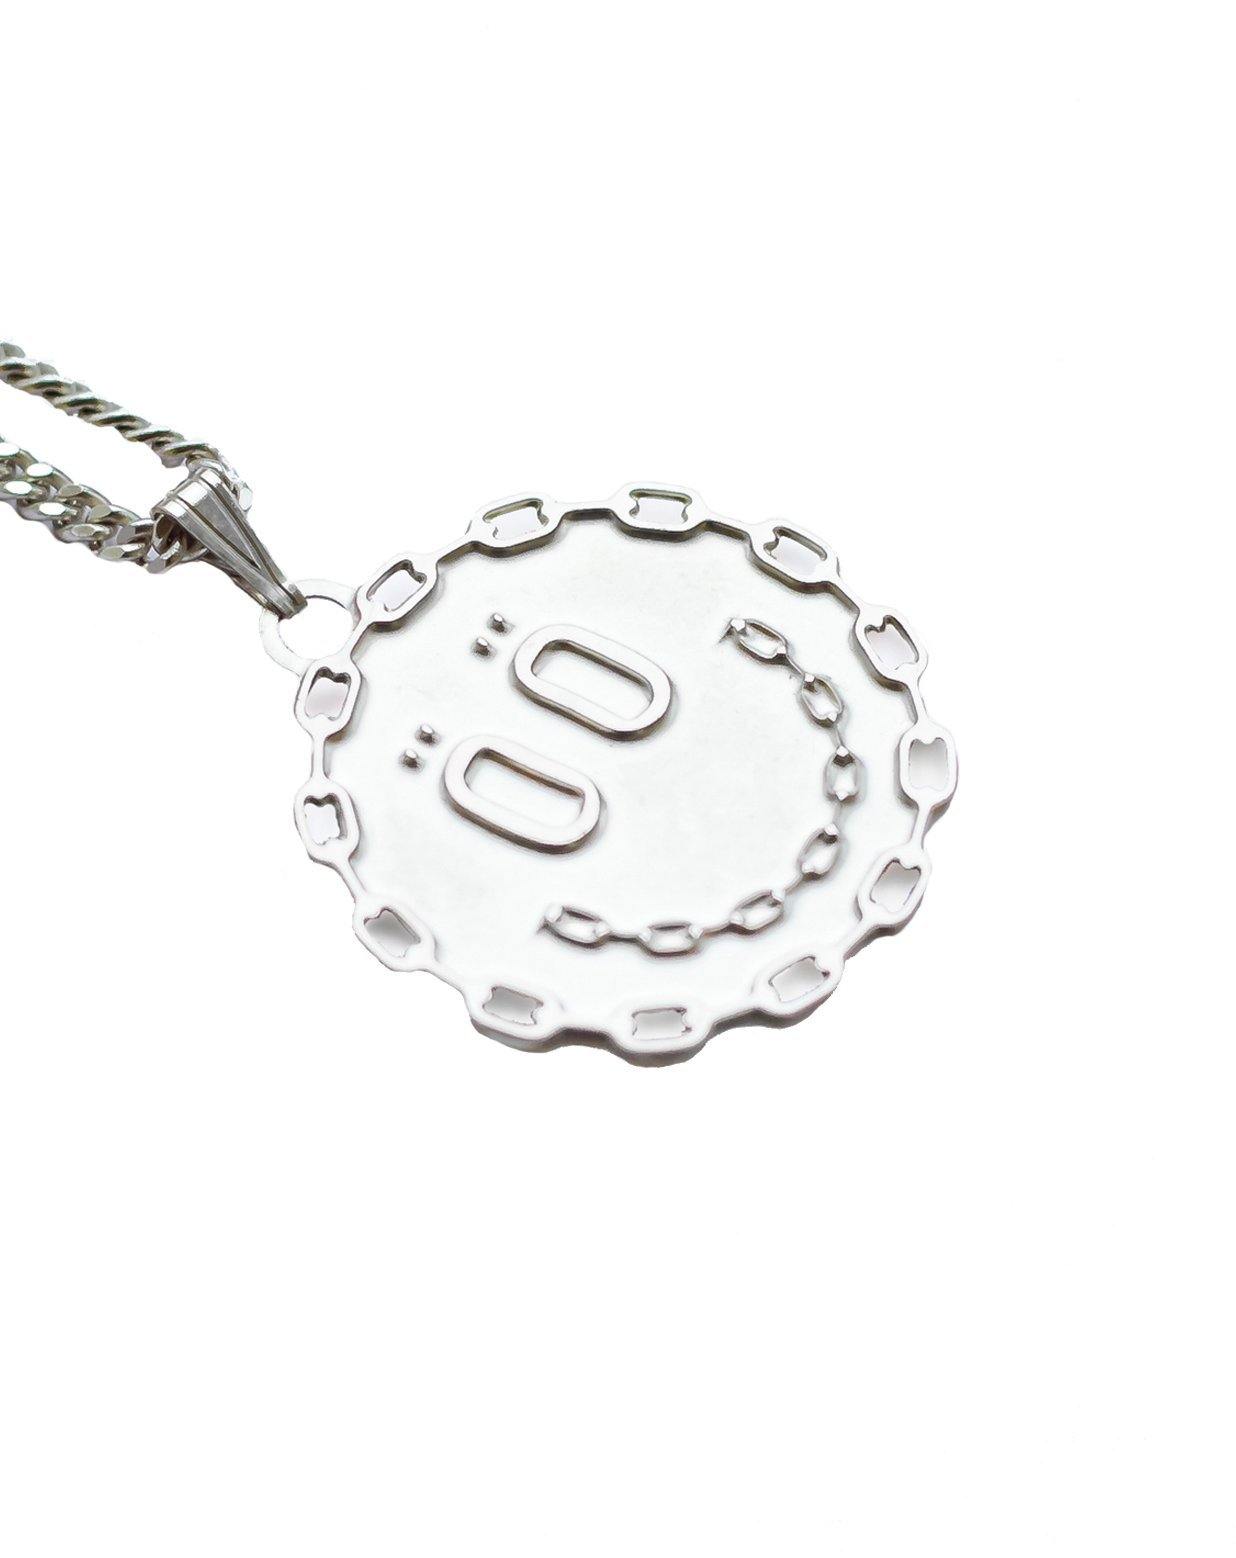 SMILE TODAY Medallion - Silver - Stööki - jewellery necklaces jewellers silver jewelryaddict goldplated jewelrygram accessories sterlingliver gold rings necklace chains necklaces pendants bling handcrafted